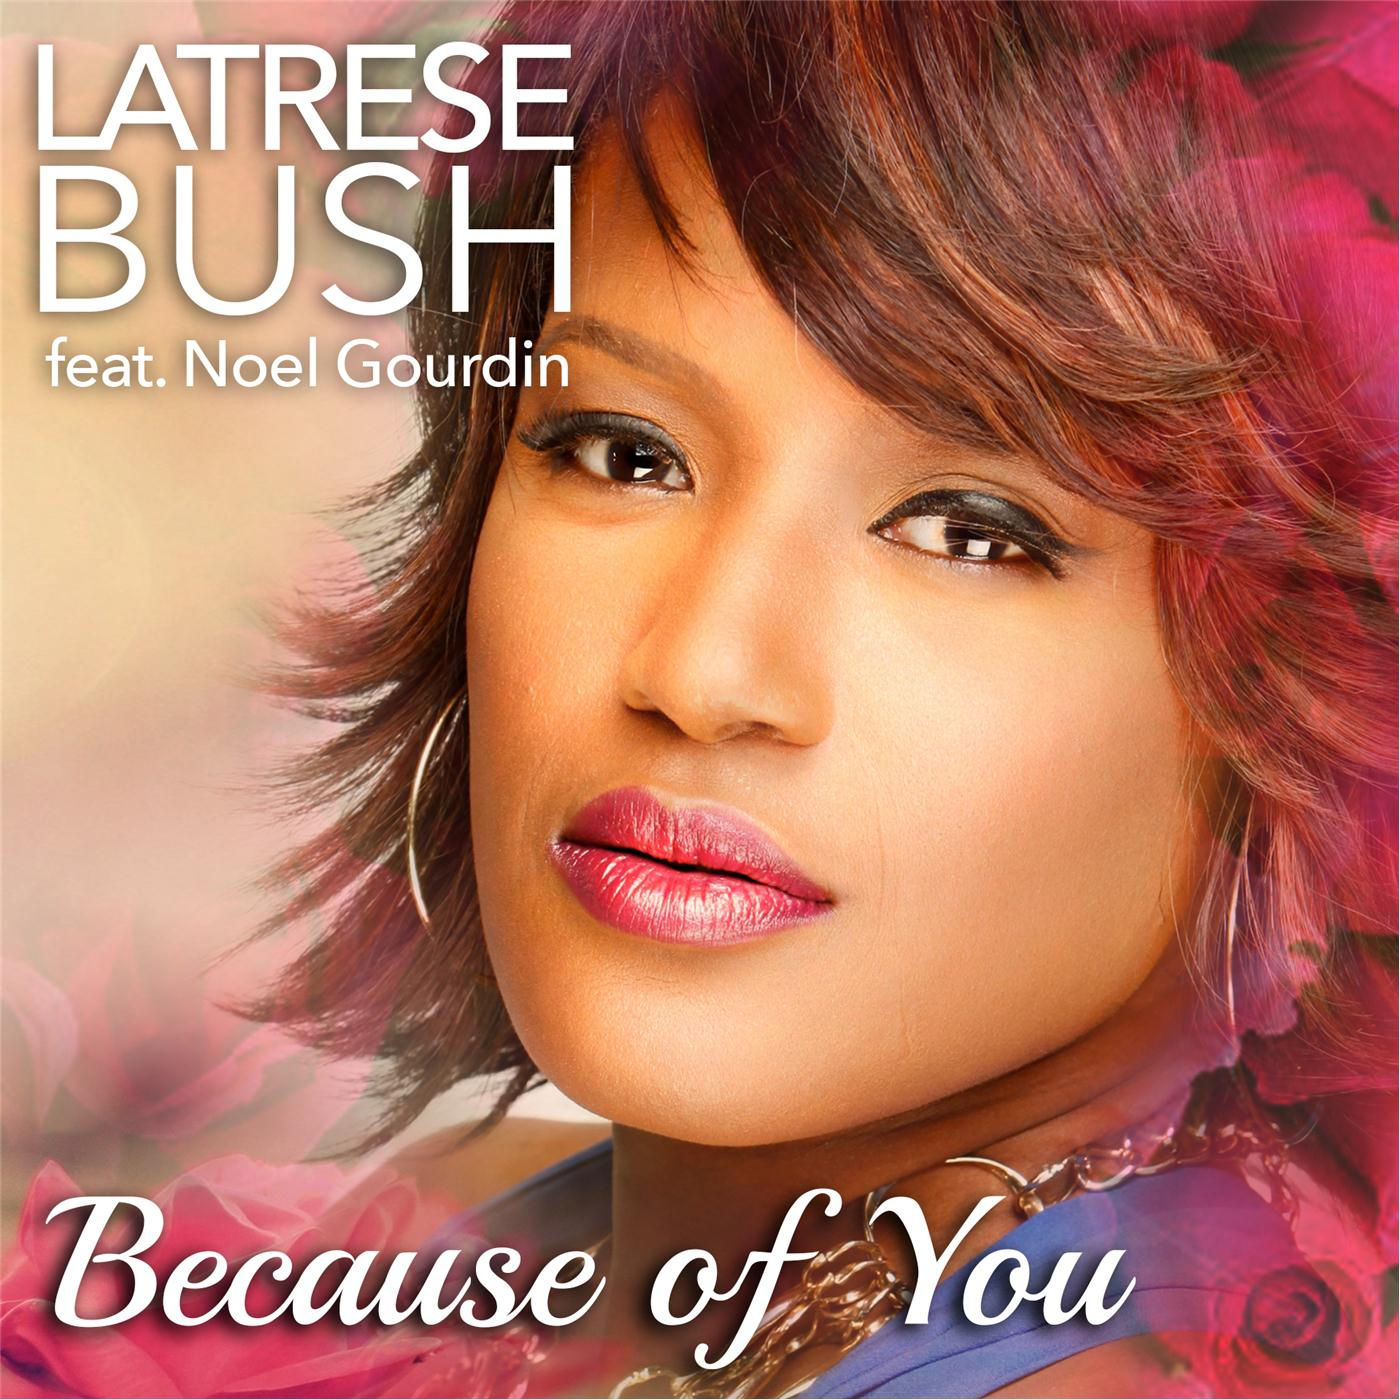 New Video: Latrese Bush "Because of You" featuring Noel Gourdin